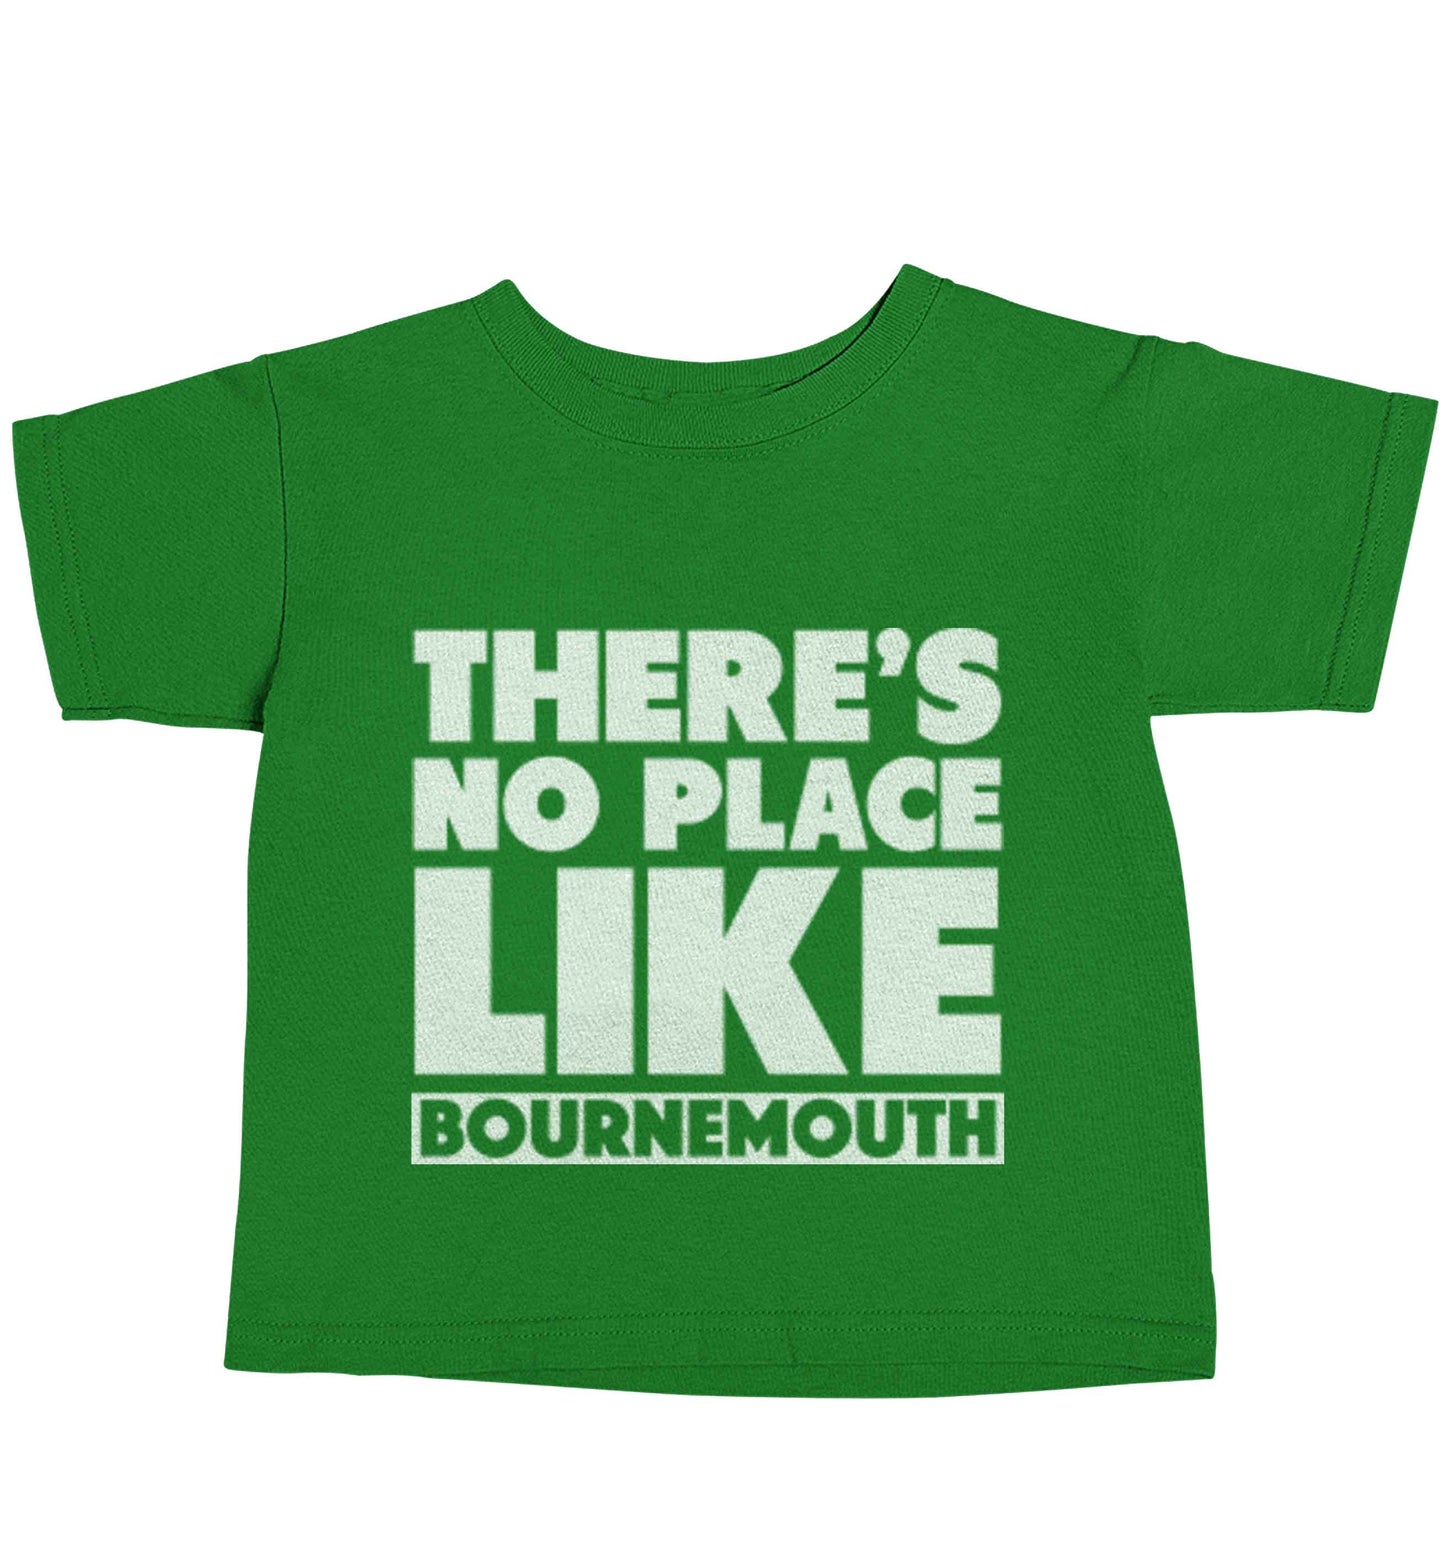 There's no place like Bournemouth green baby toddler Tshirt 2 Years